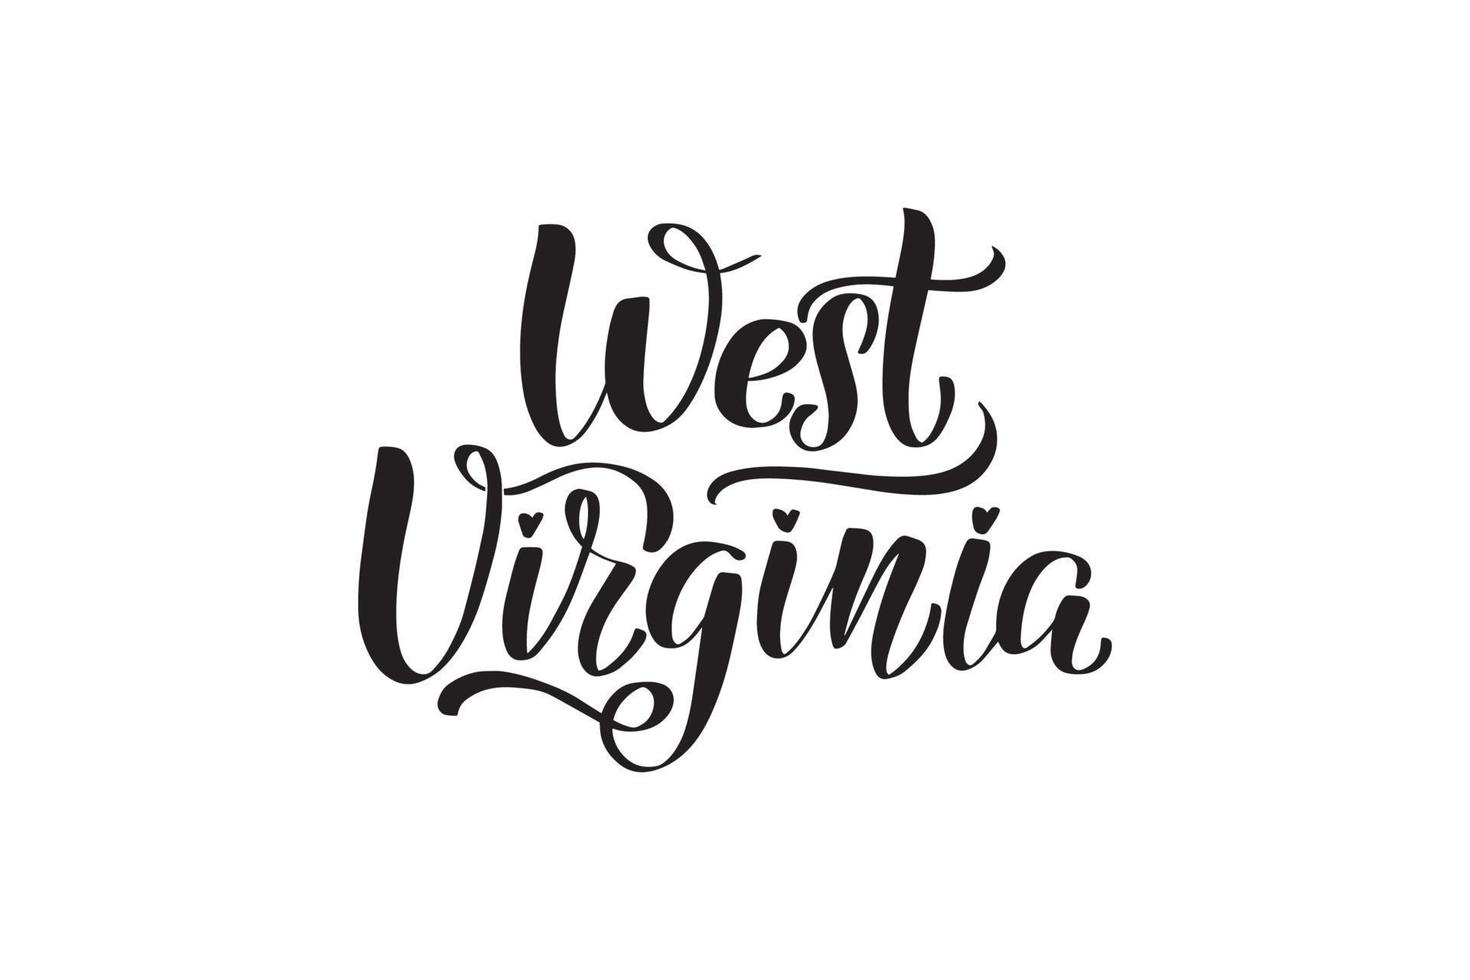 Inspirational handwritten brush lettering West Virginia. Vector calligraphy illustration isolated on white background. Typography for banners, badges, postcard, tshirt, prints, posters.